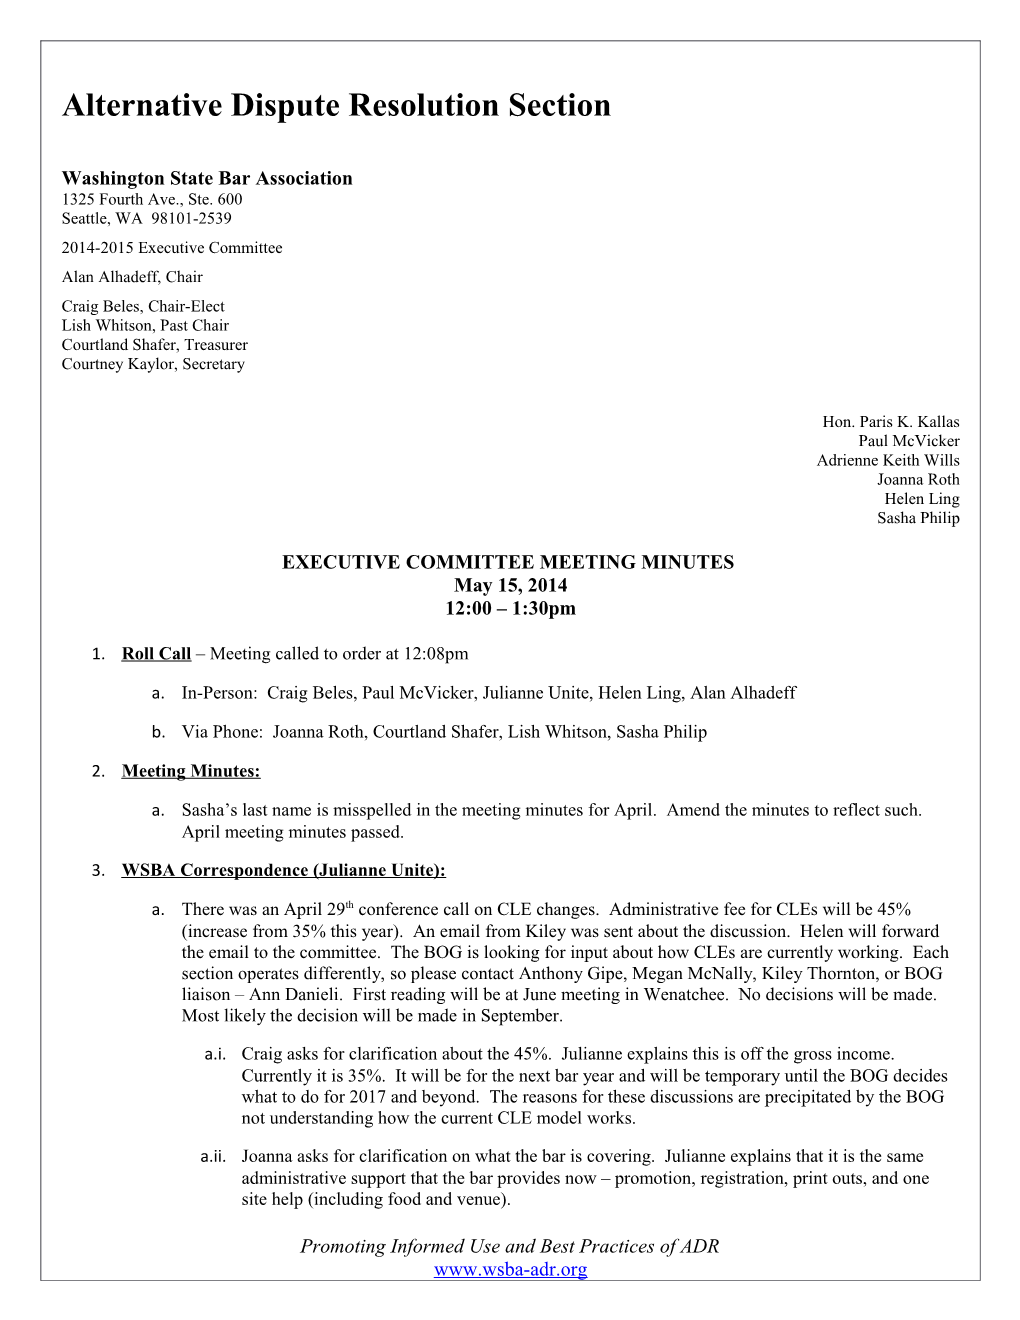 Executive Committee Meeting Minutes s1